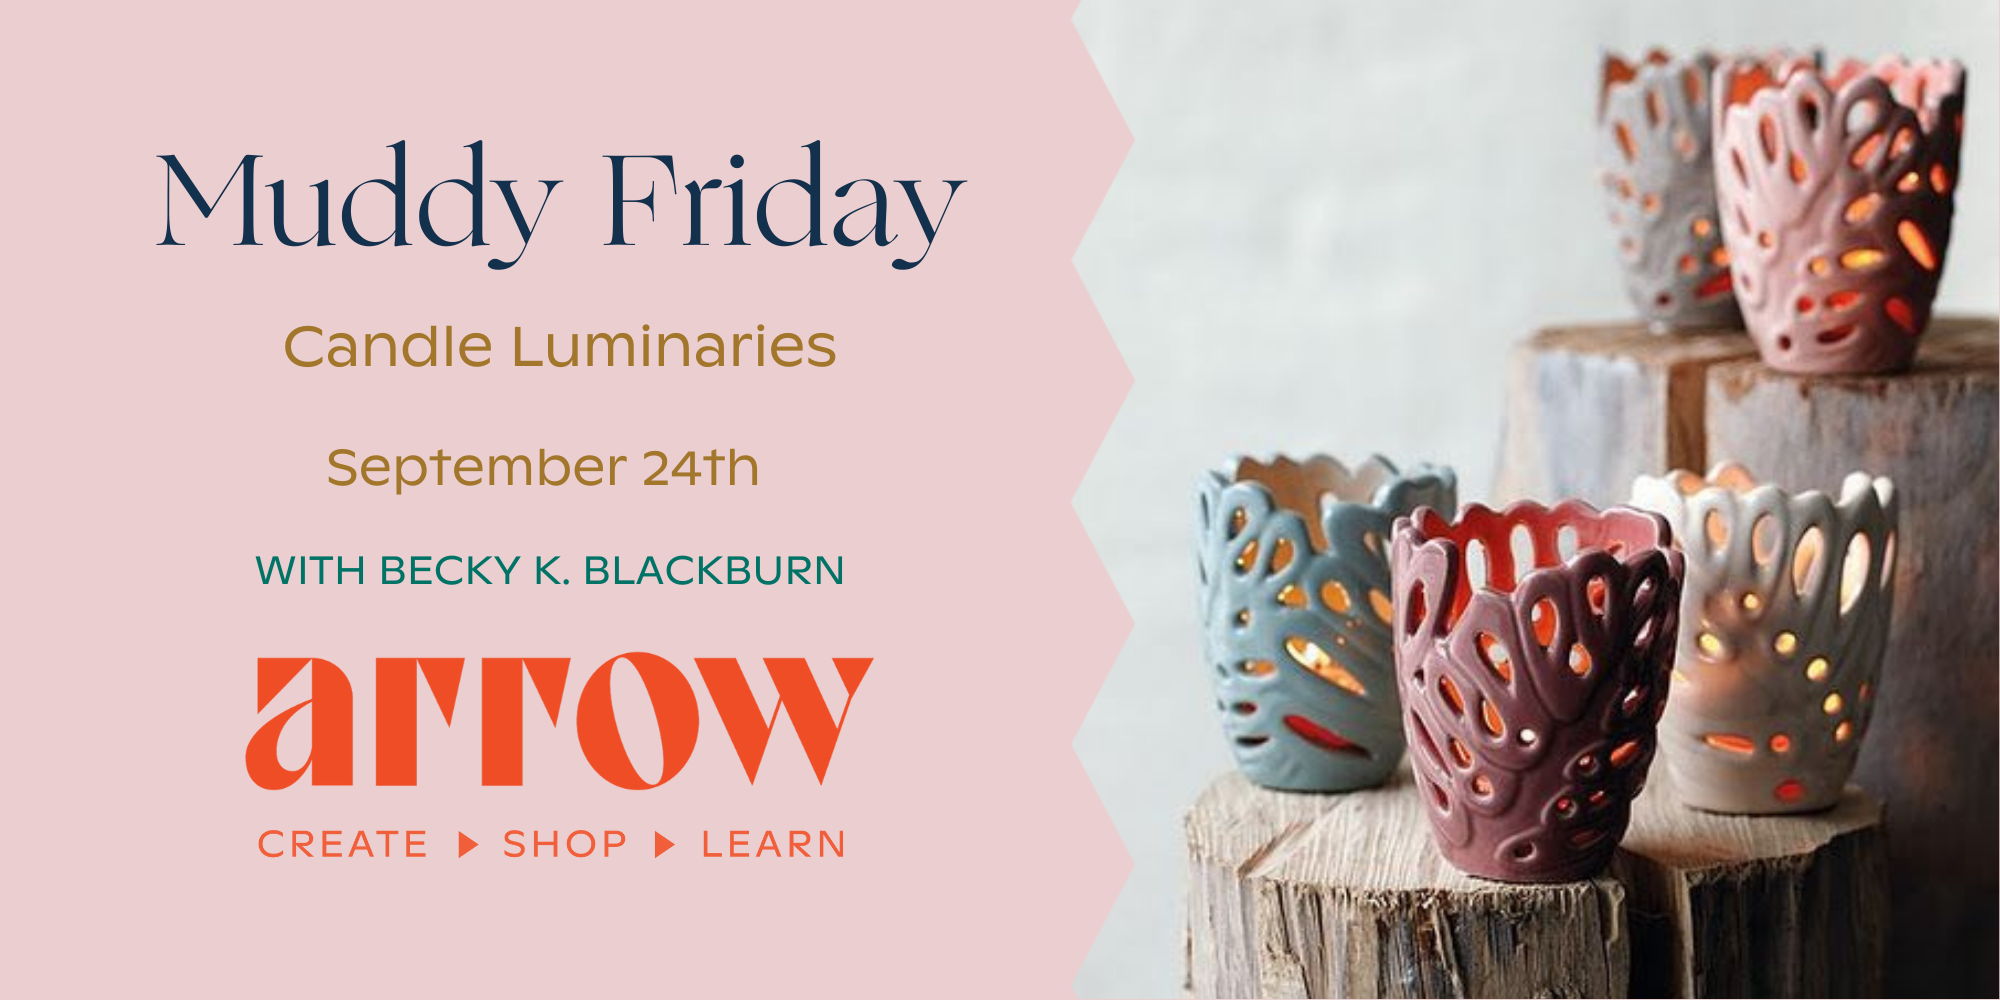 Muddy Friday: Candle Luminaries with Becky K. Blackburn promotional image